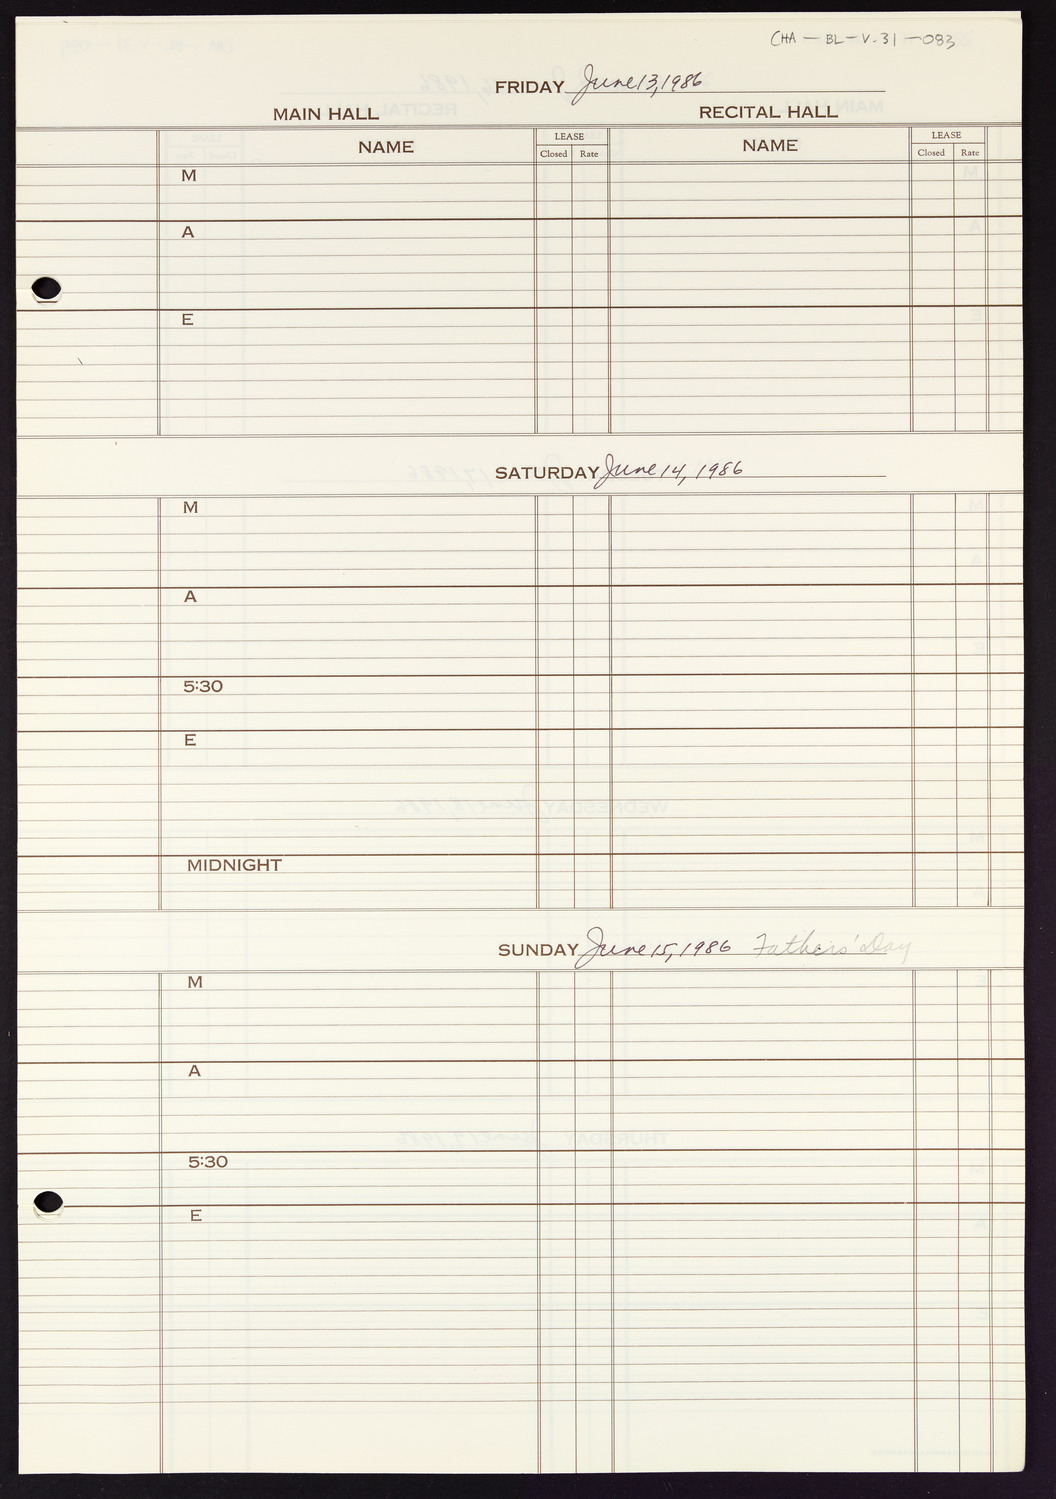 Carnegie Hall Booking Ledger, volume 31, page 83